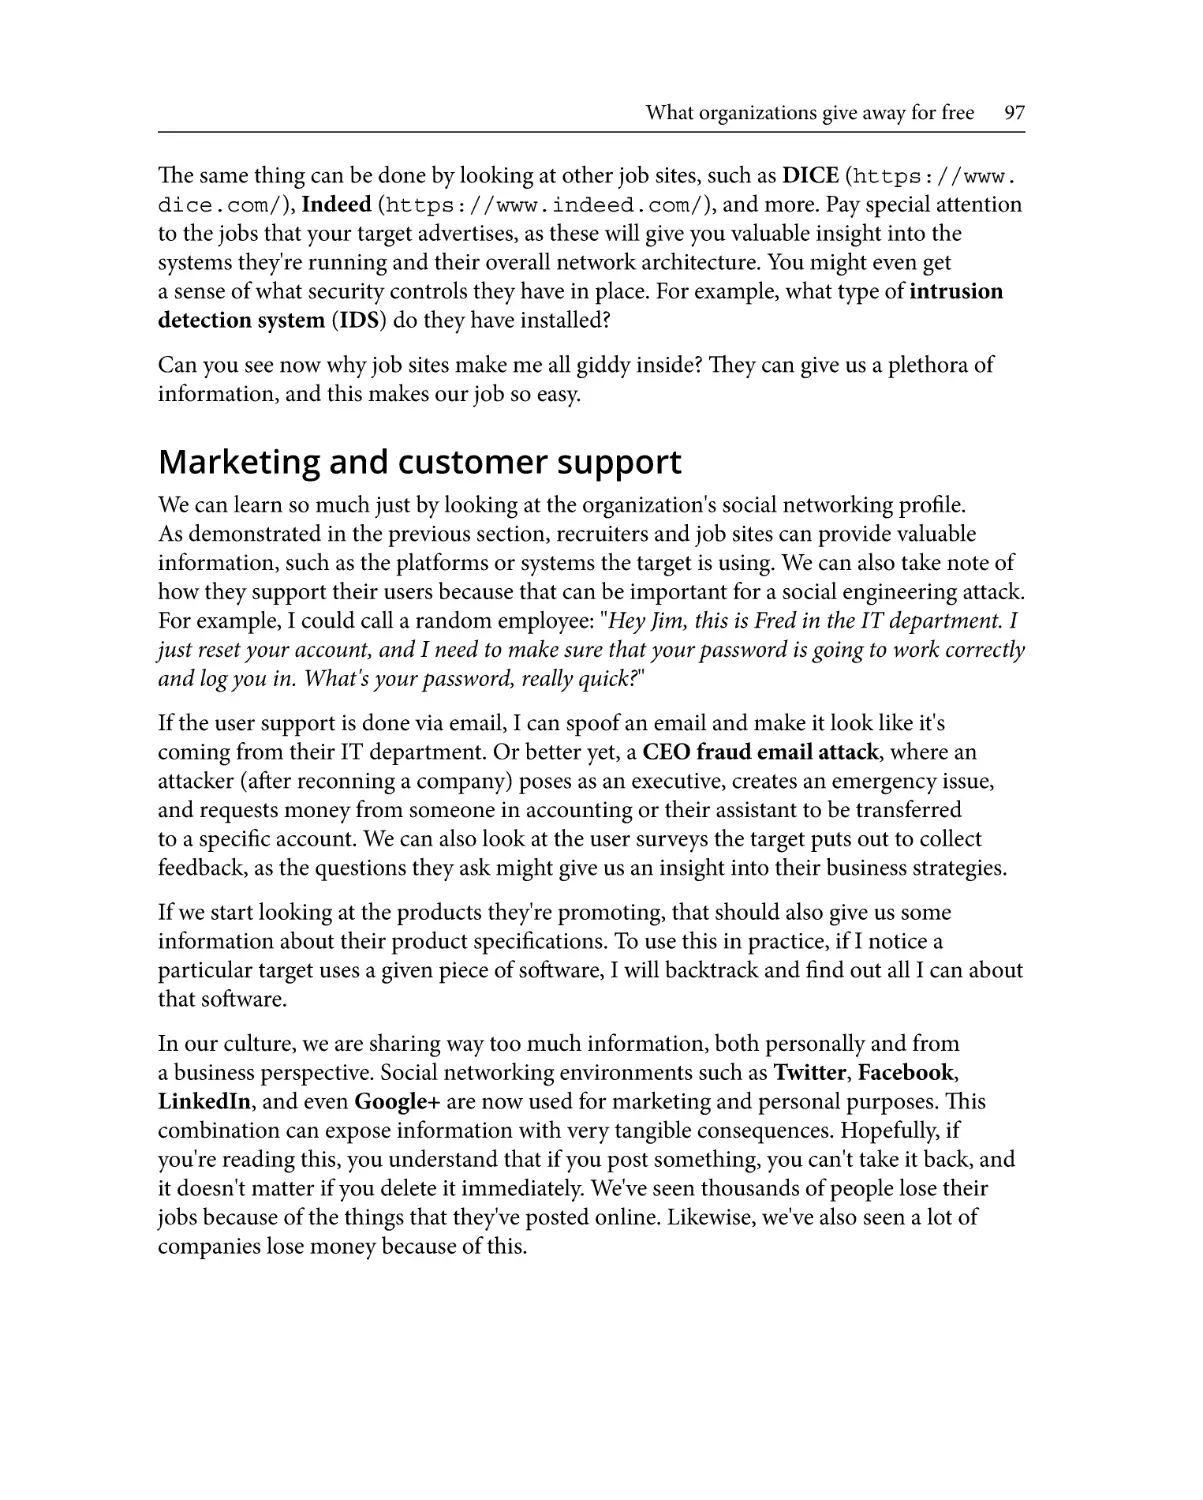 Marketing and customer support